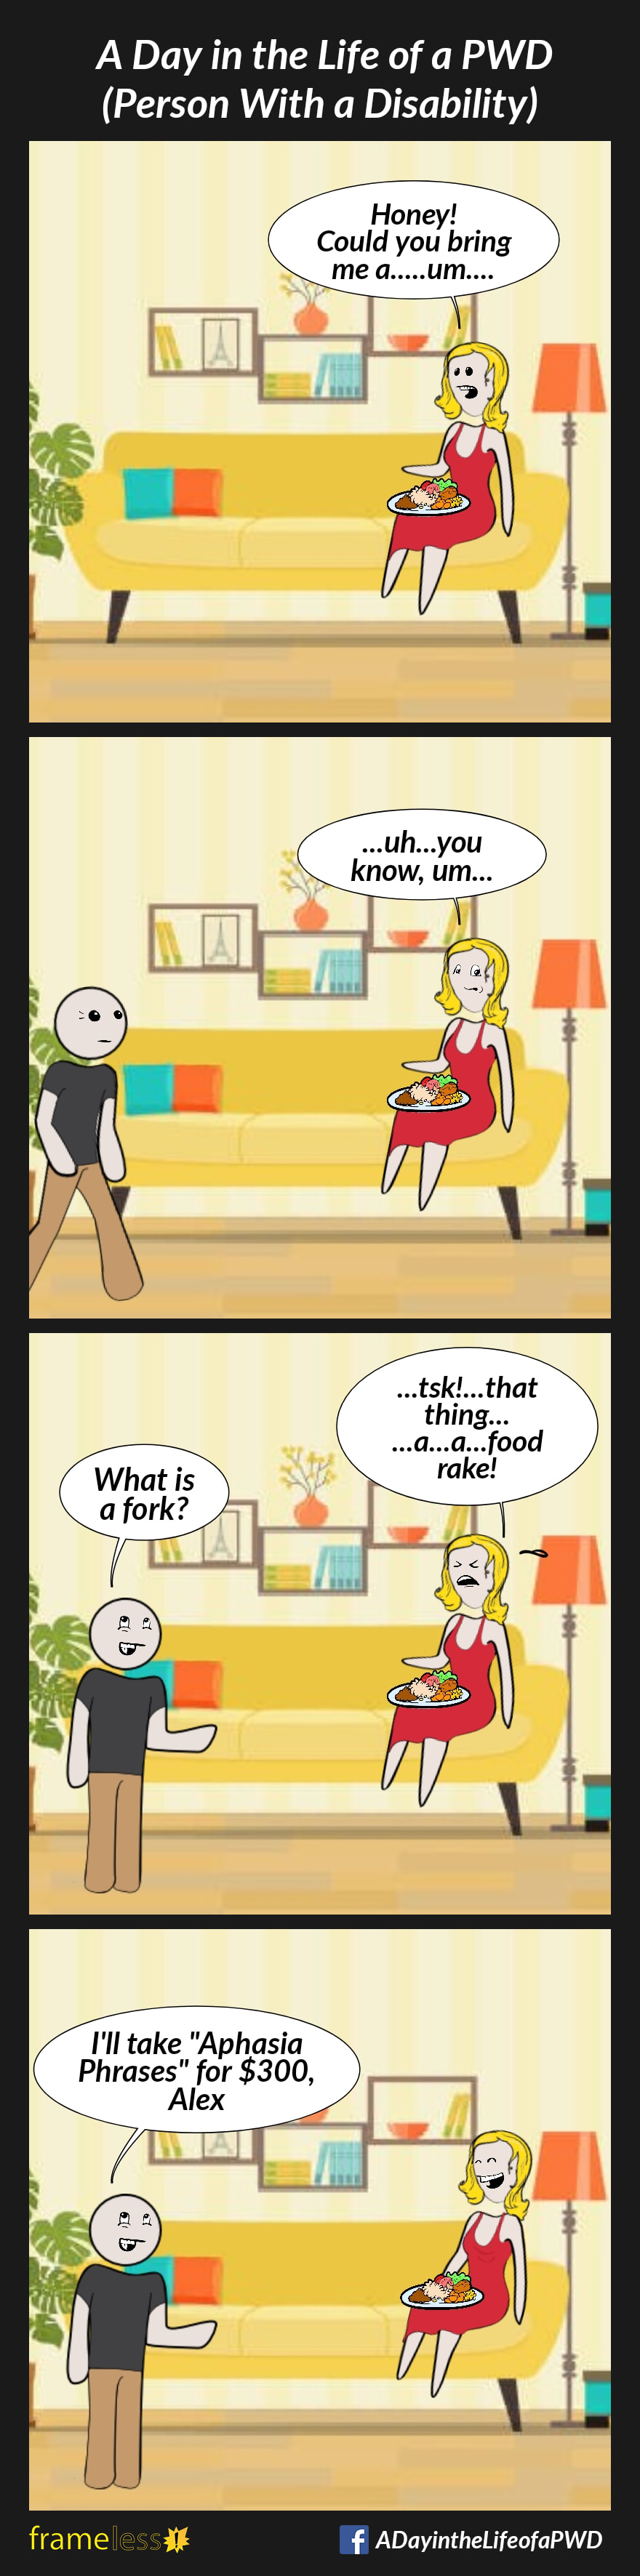 COMIC STRIP 
A Day in the Life of a PWD (Person With a Disability) 

Frame 1:
A woman sits on a sofa with a plate of food on her lap.
WOMAN: Honey! Could you bring me a...um...

Frame 2:
A man enters.
WOMAN: ...uh...you know, um...

Frame 3:
WOMAN (frustrated): ...task!...that thing...a...a food rake!
MAN: What is a fork?

Frame 4:
MAN: I'll take 